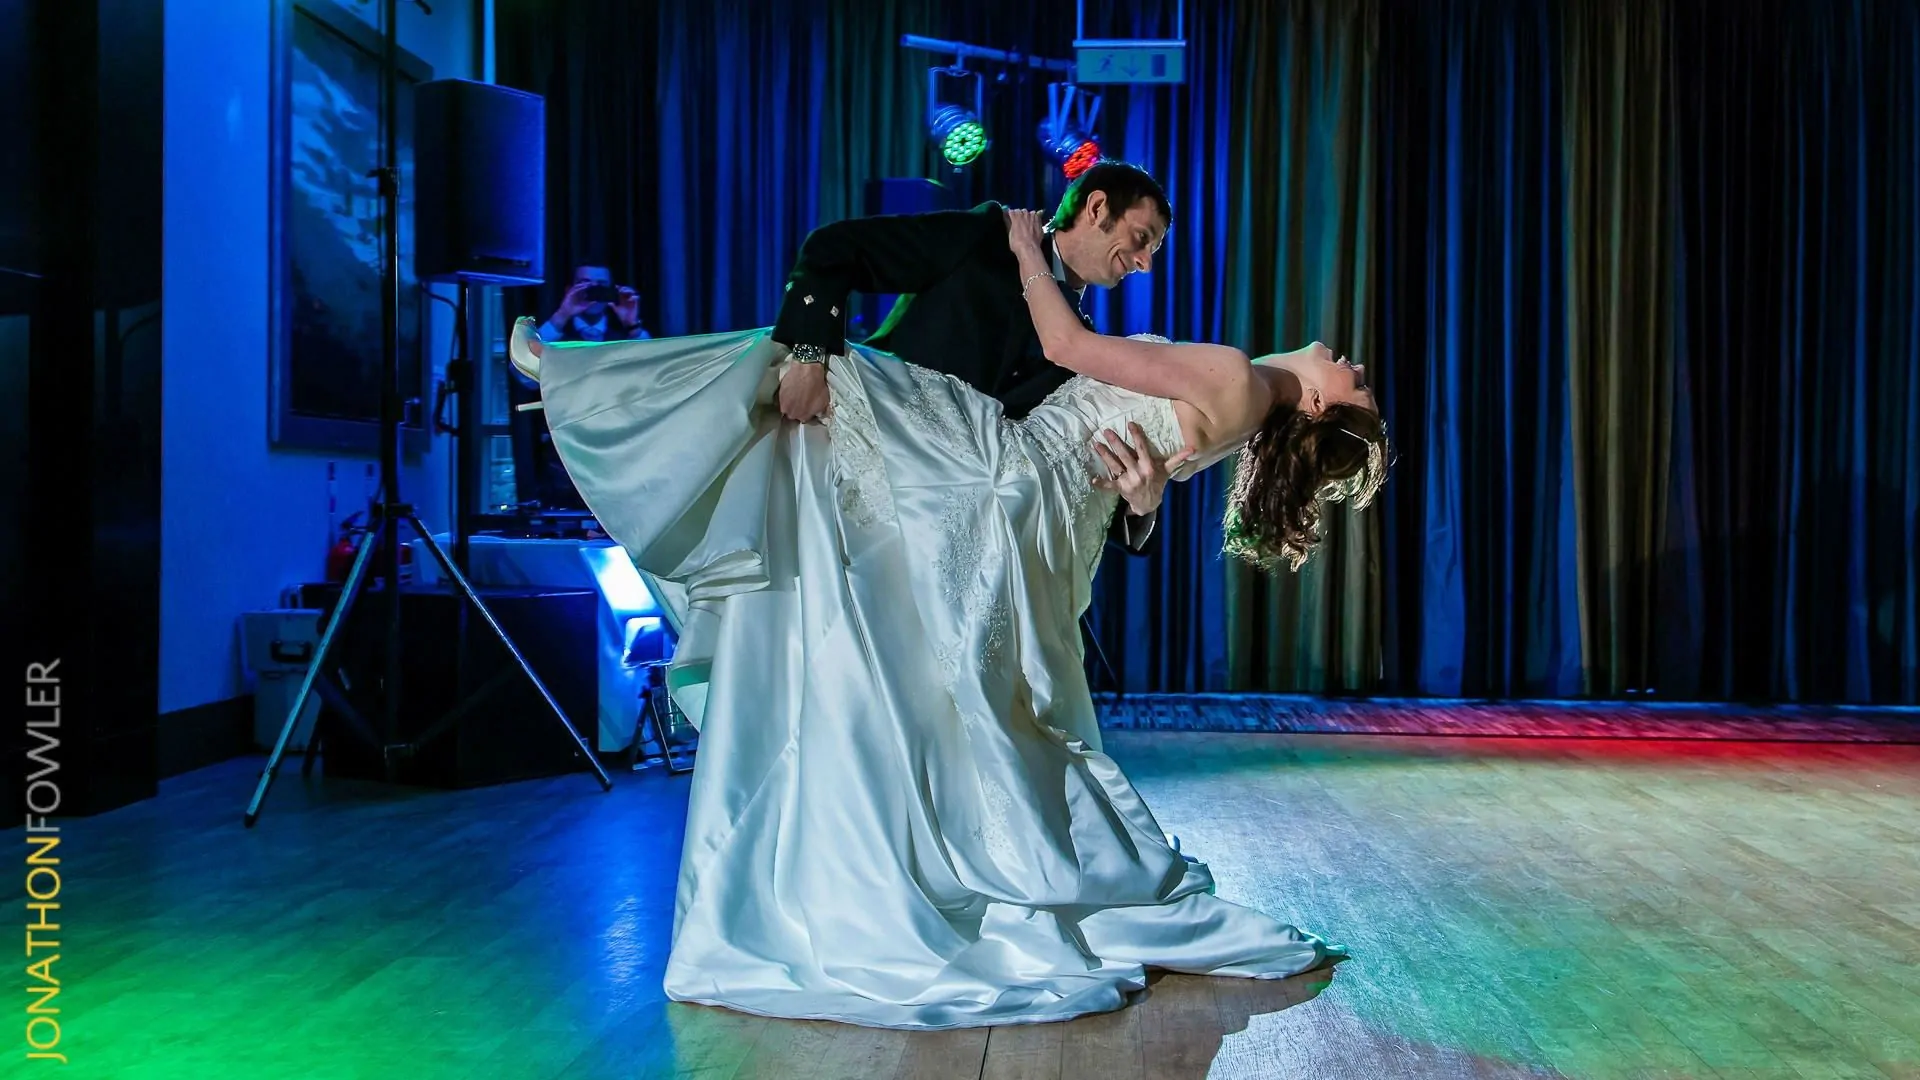 A bride and groom perform a dramatic dip dance move on a dance floor, illuminated by colorful lights.